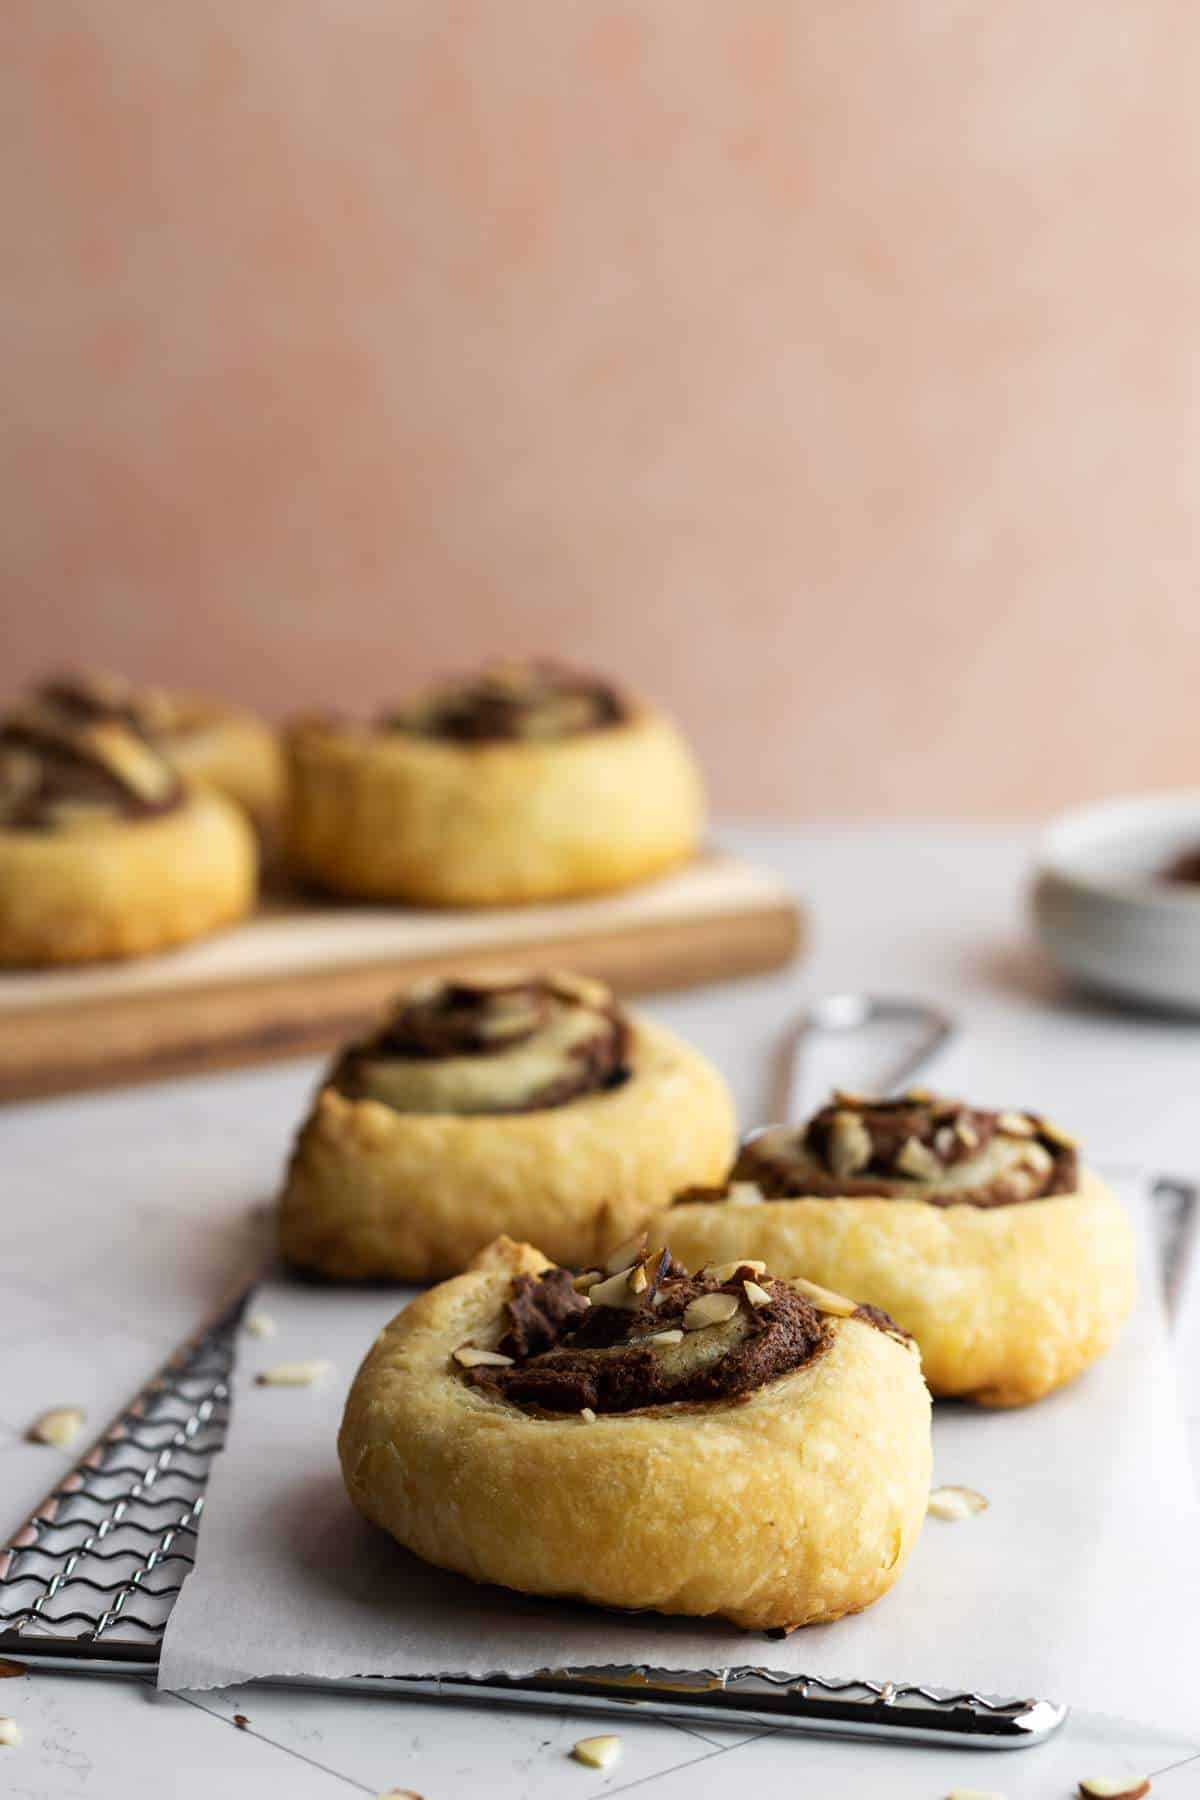 Puff pastry dessert with nutella.